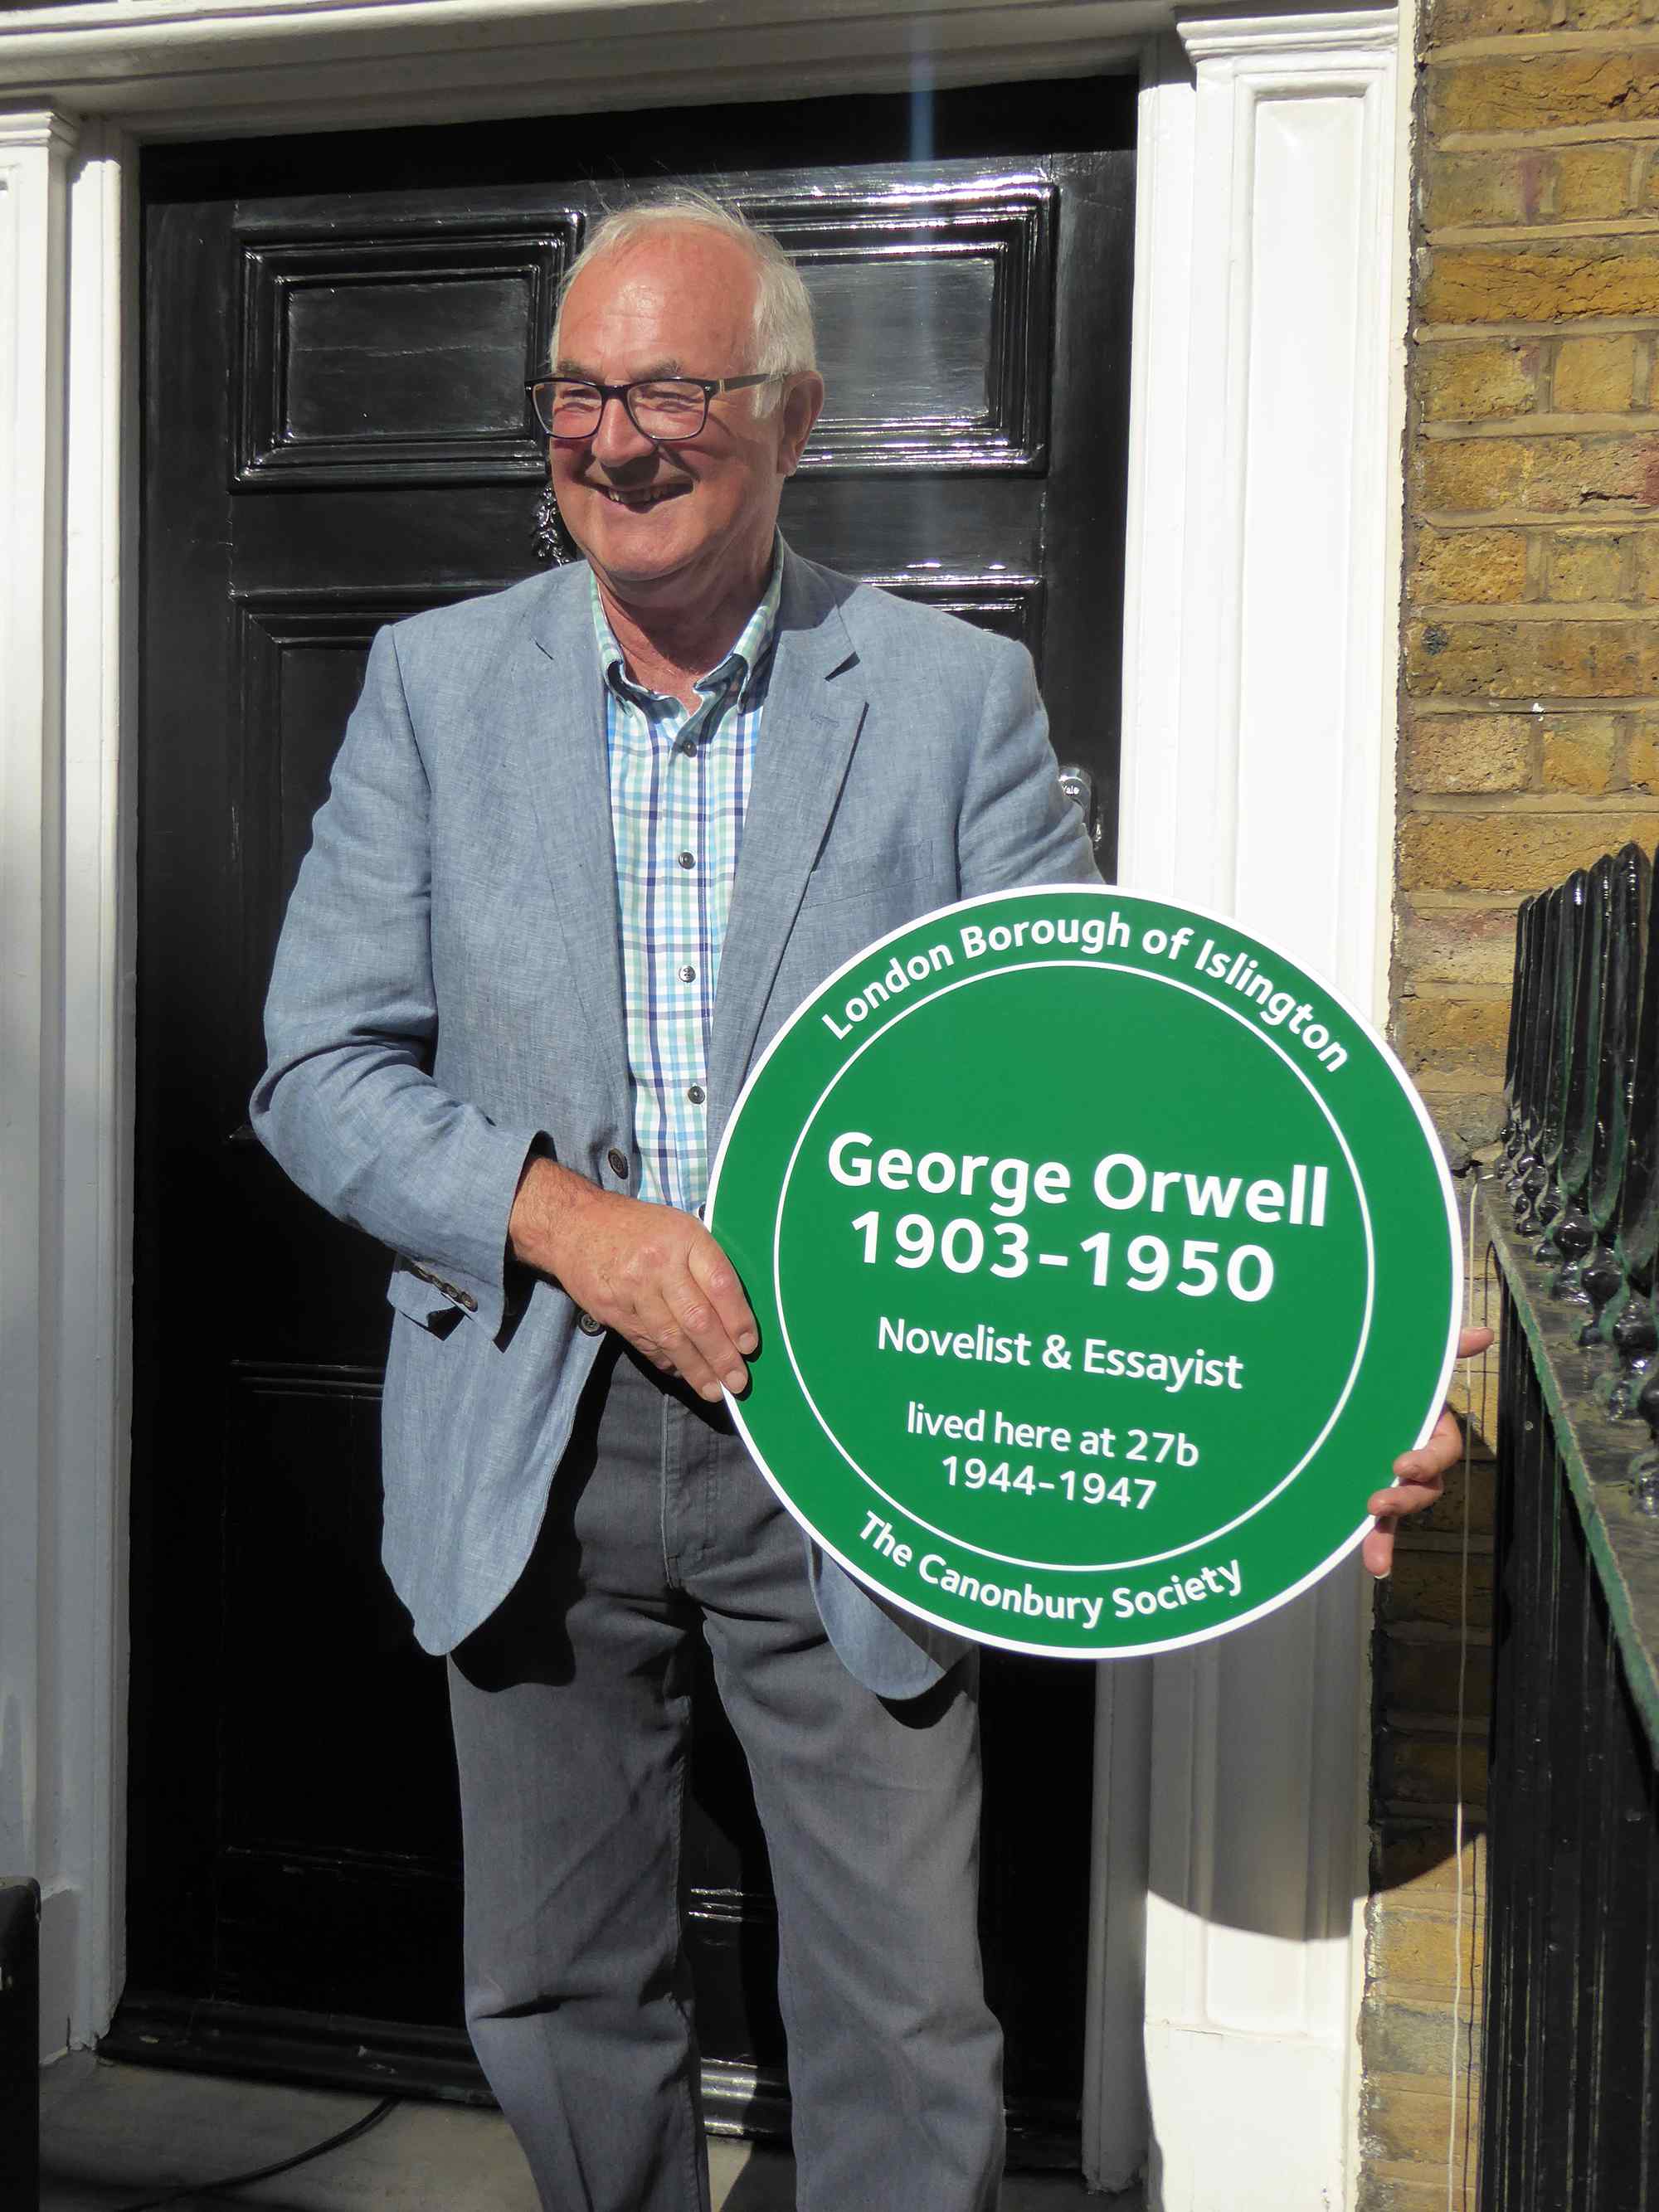 Richard Blair is Orwell's son, here holding a plaque erected on the family home in 2016.